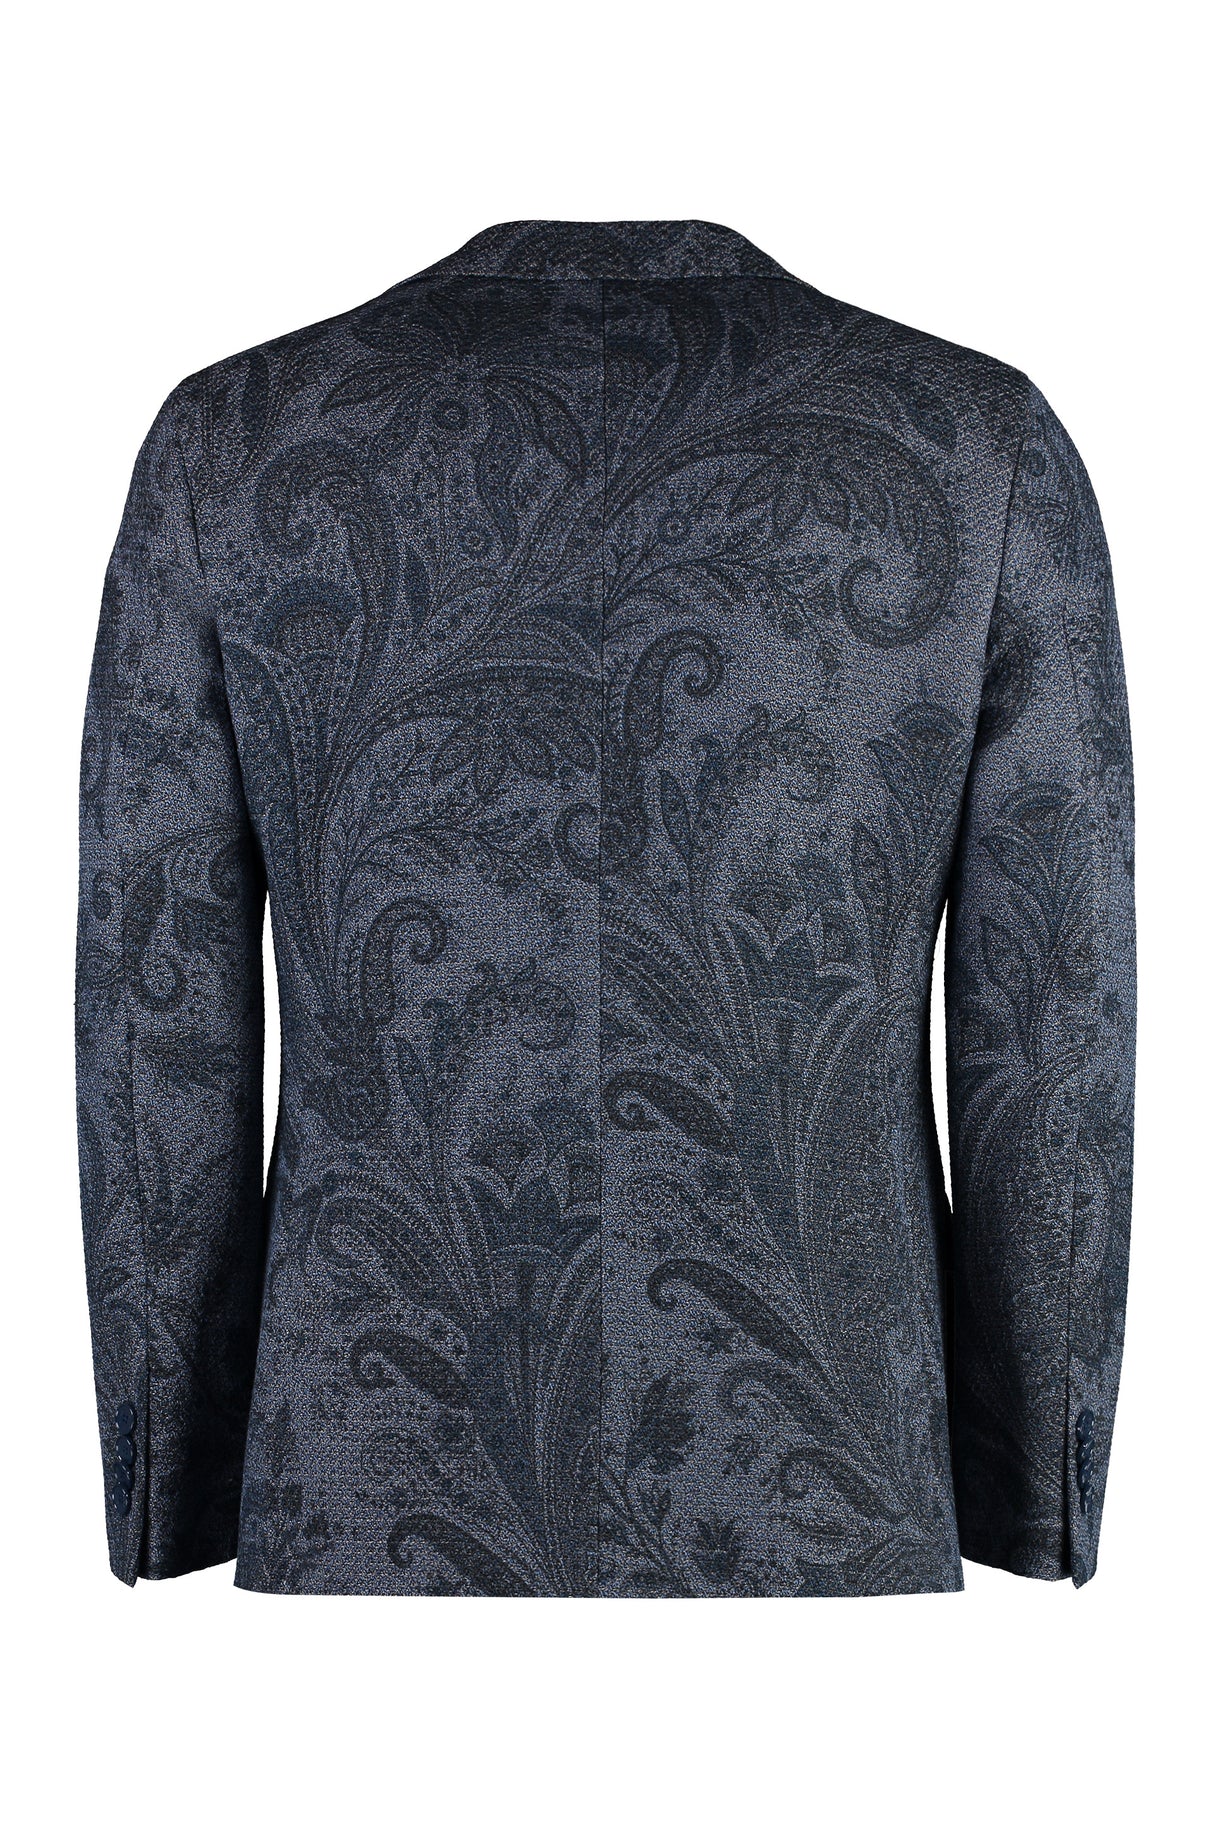 ETRO Classic Single-Breasted Jacket with Paisley Motif